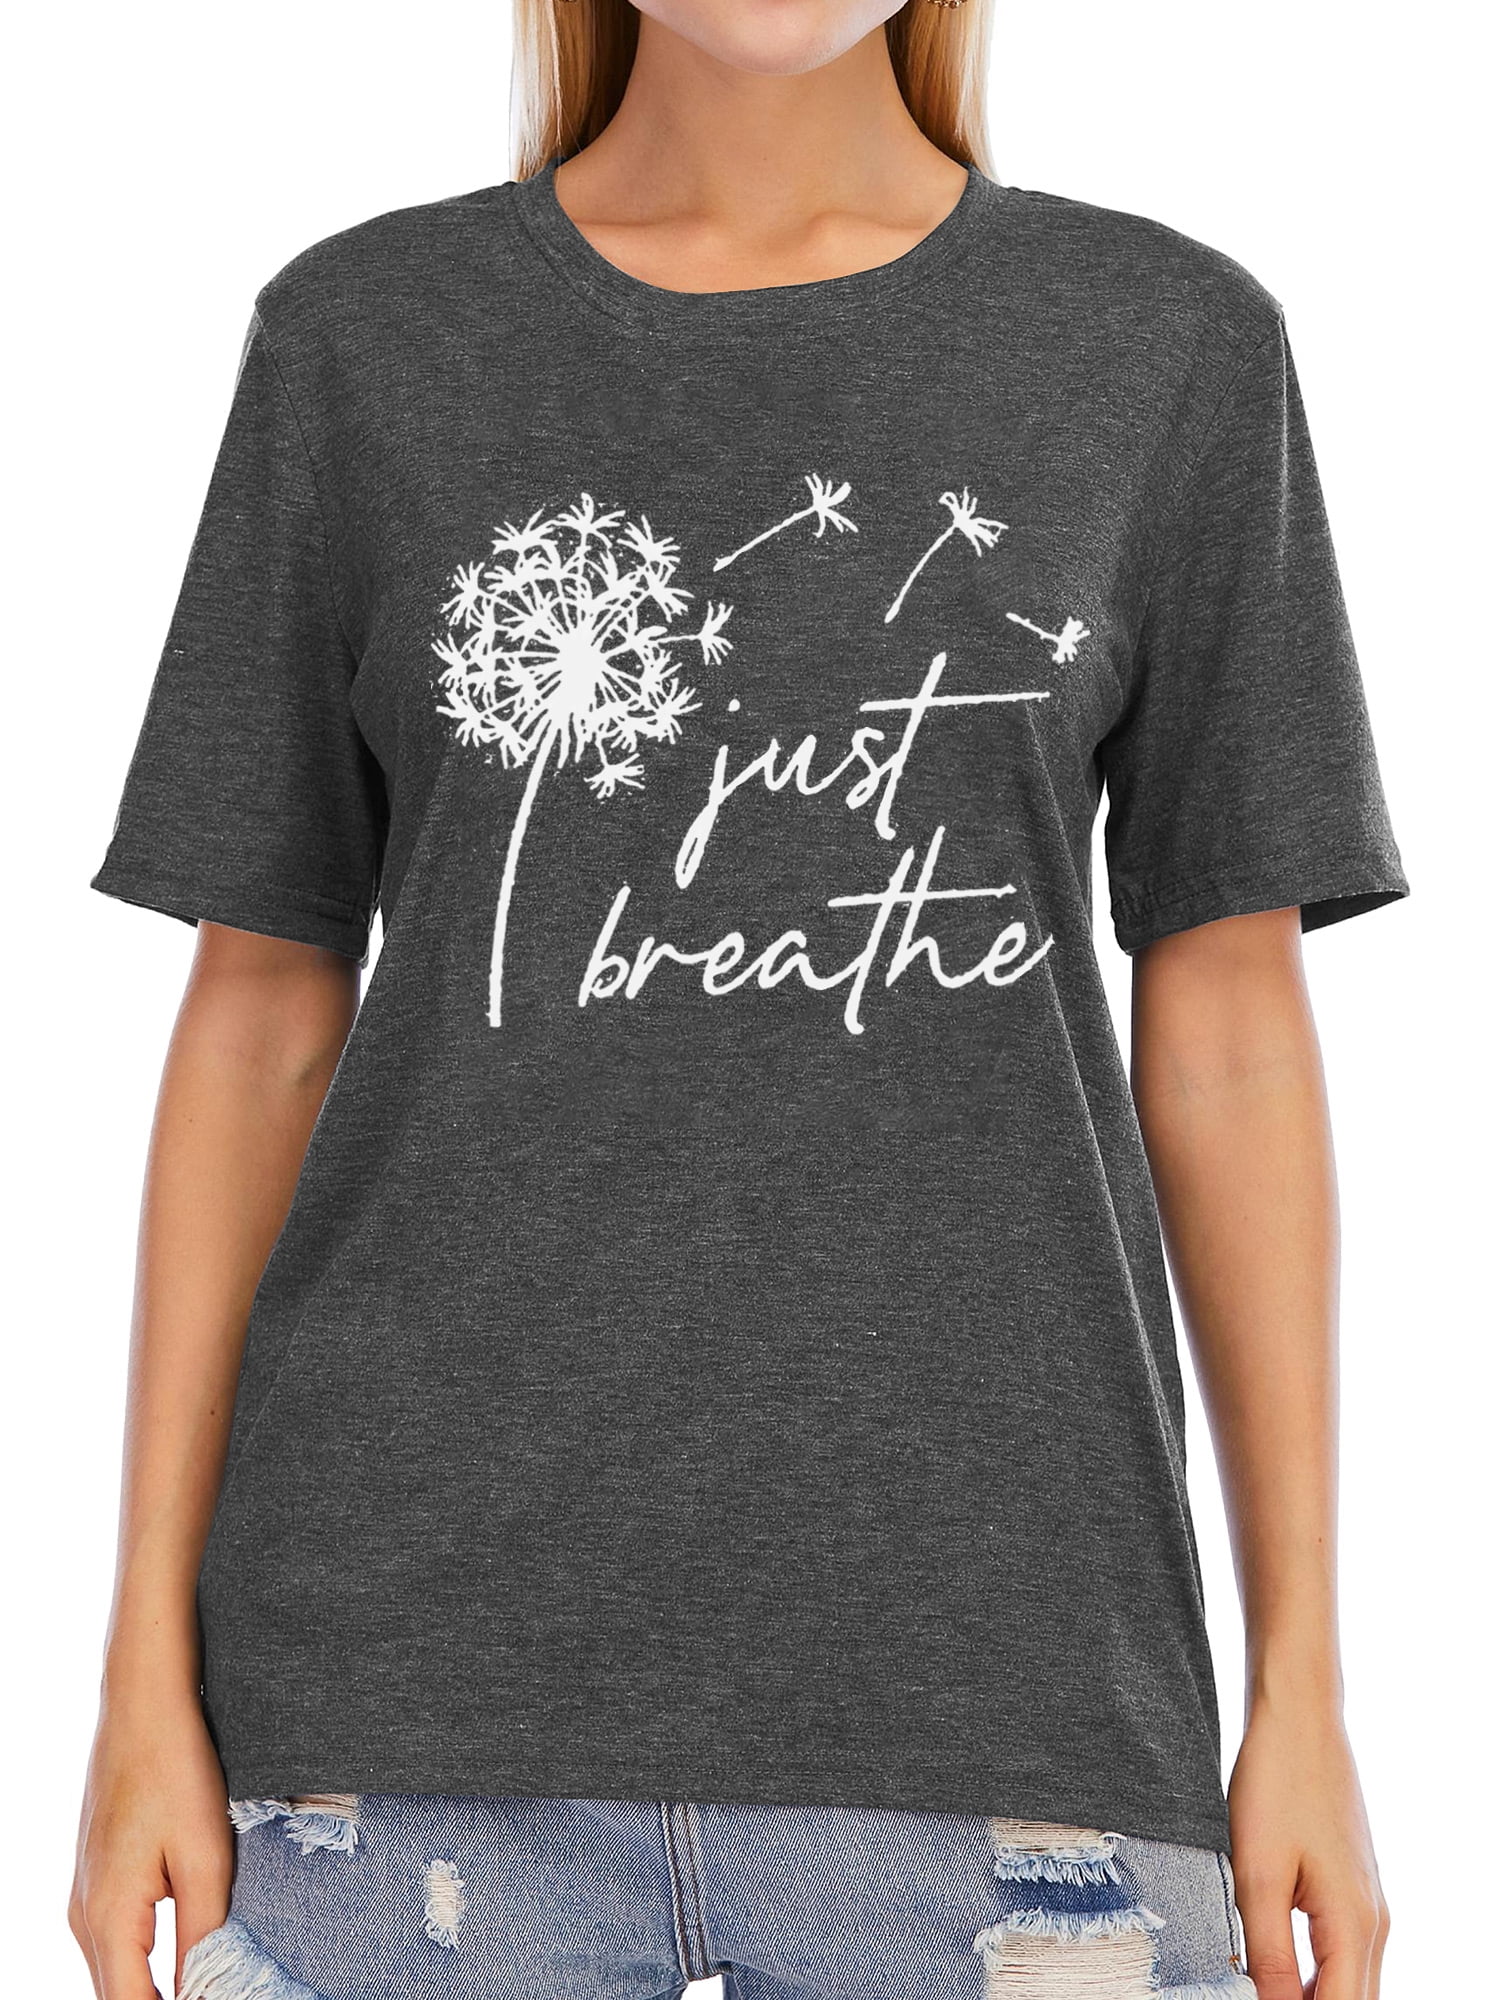 Anbech Dandelion T shirt for Women Graphic Tees with Just Breathe Tees ...